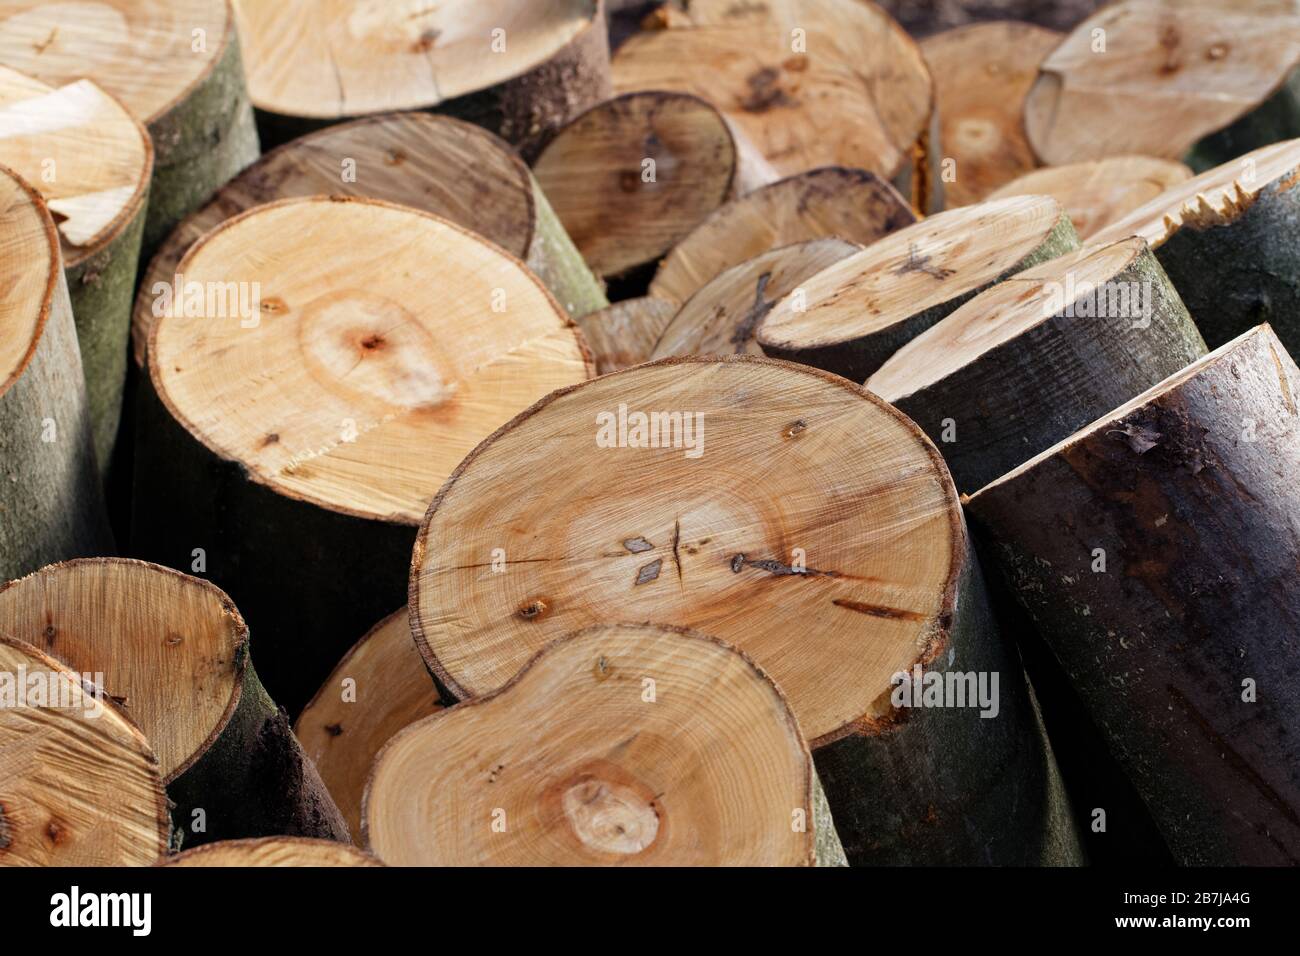 Timber Harvesting: Pile of Freshly Cut Beech Tree Sections Stock Photo